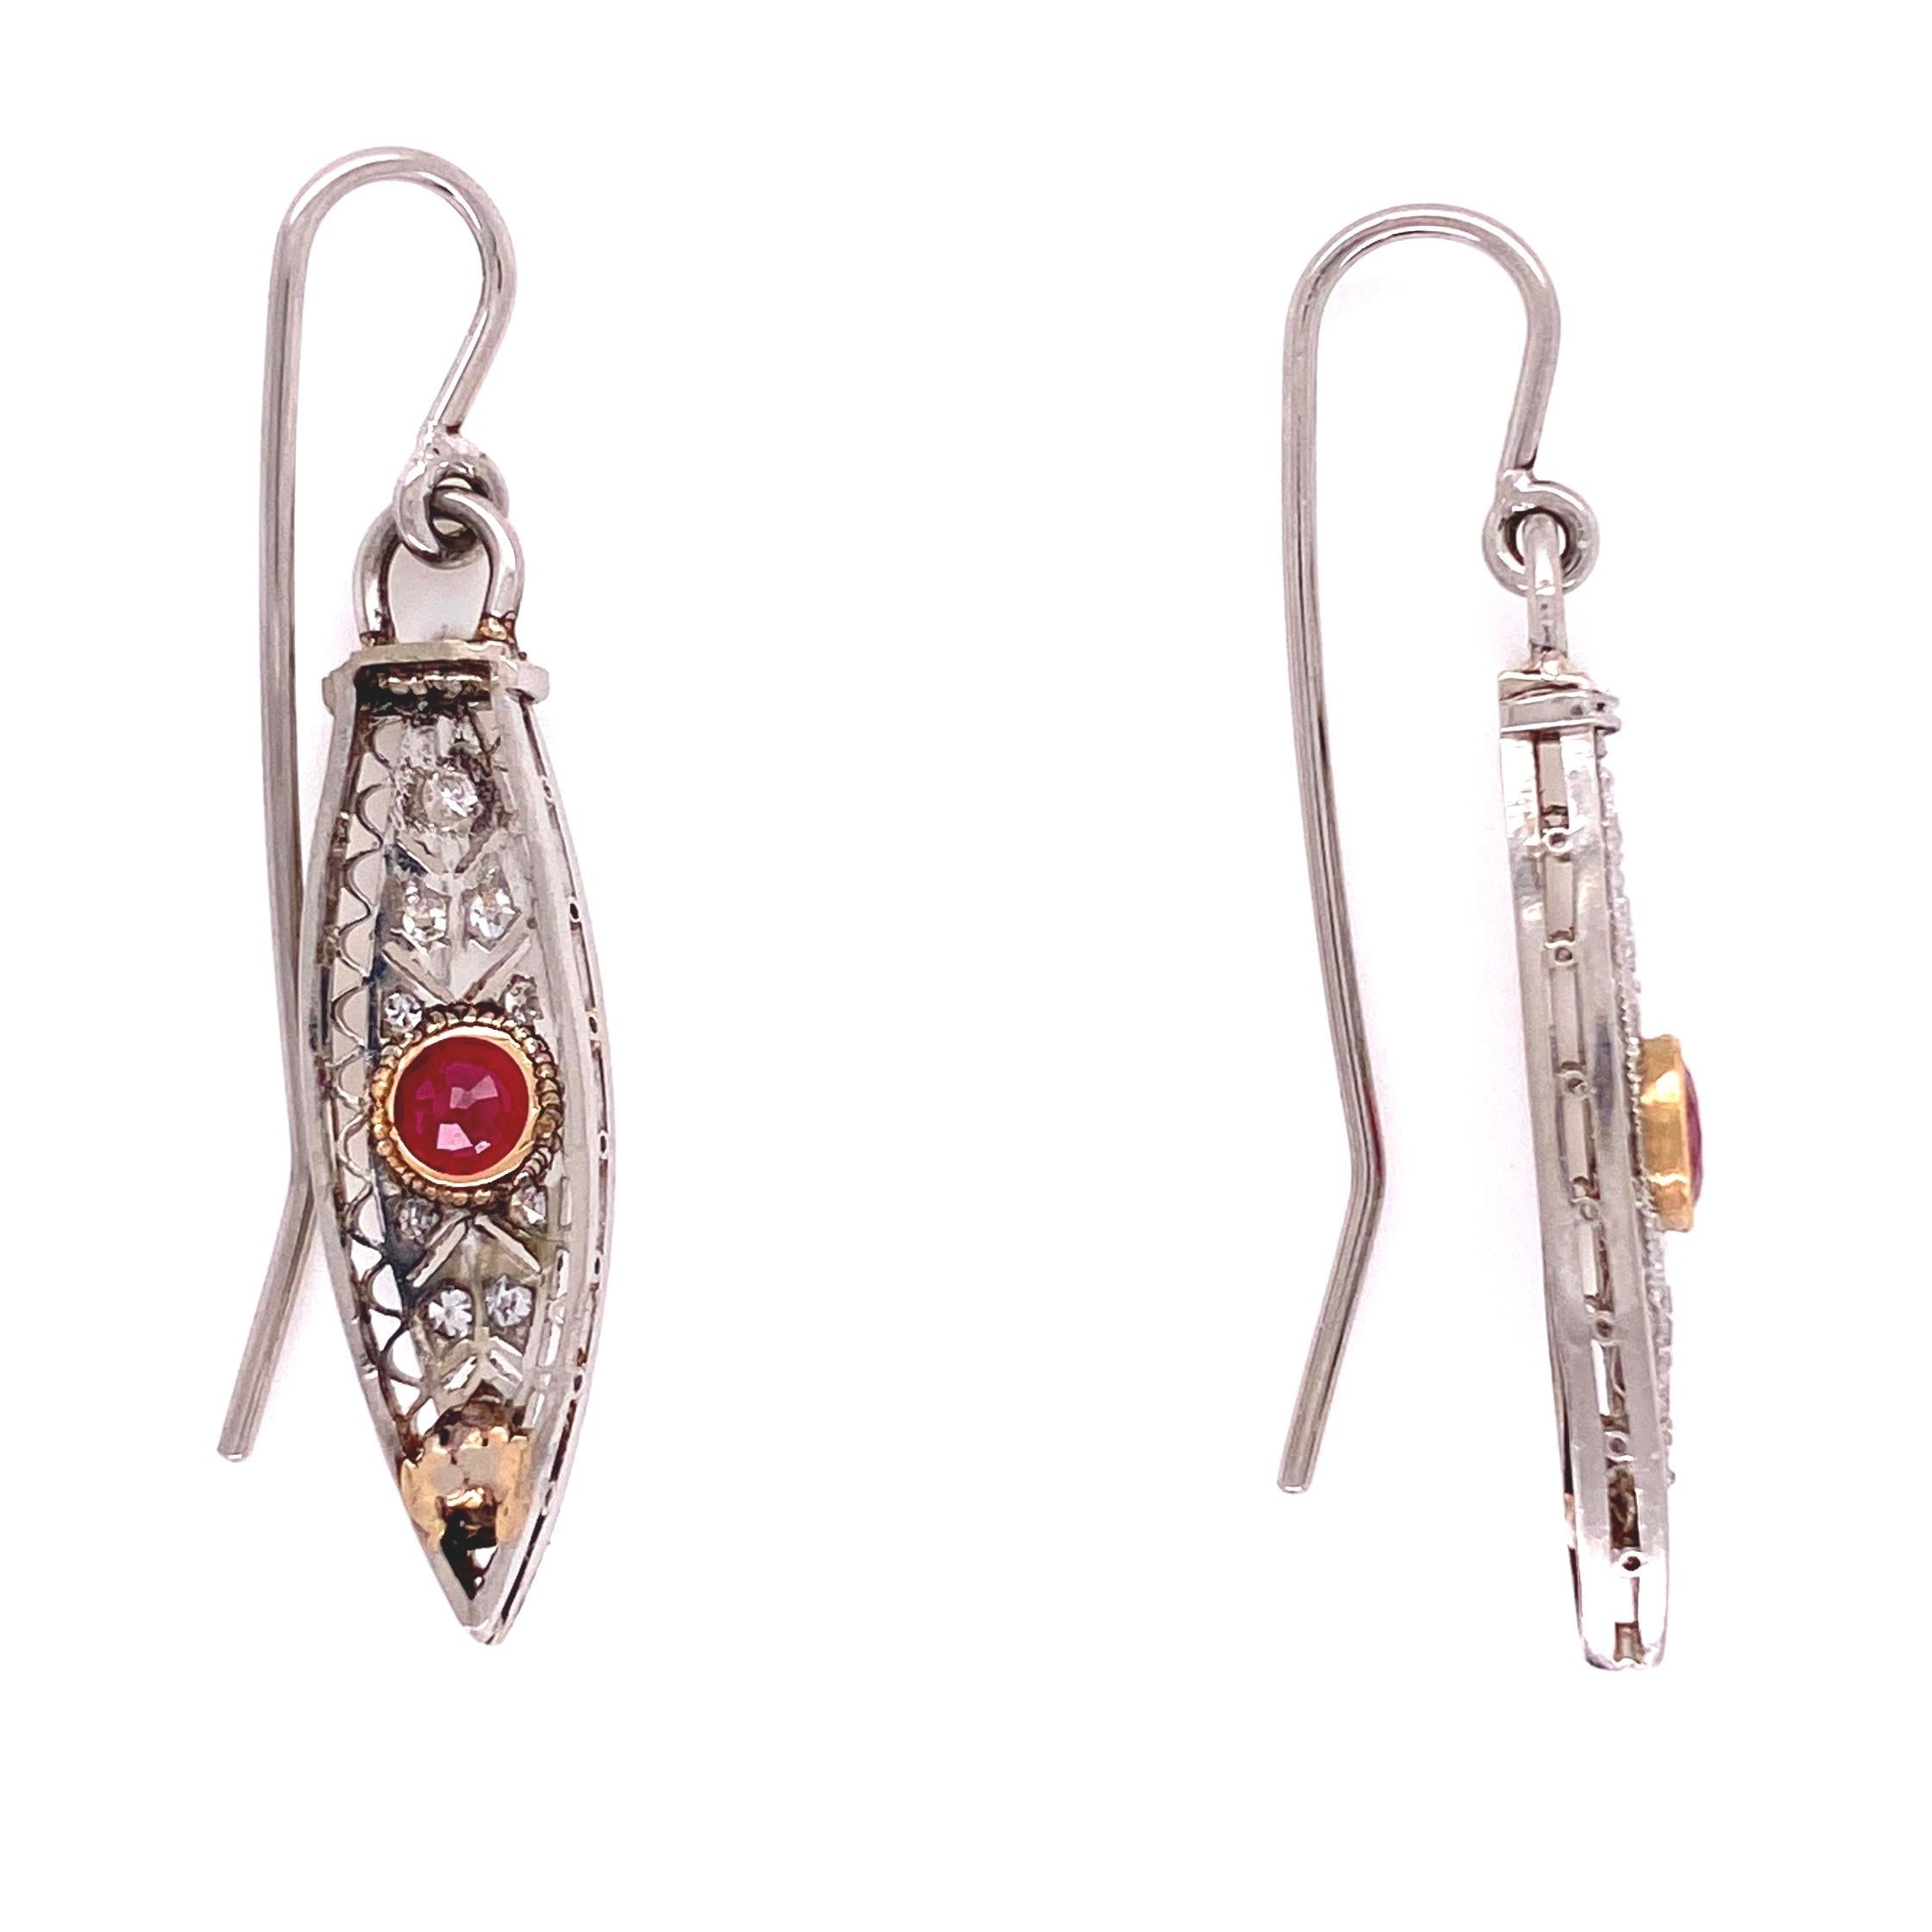 Simply Beautiful and finely detailed Drop Earrings, securely set with 2 rubies with approx. 0.40 total Carat weight and 0.12 total Carat weight Diamonds. Hand crafted Platinum detailed filigree and milgrain mounting. The earrings epitomize vintage